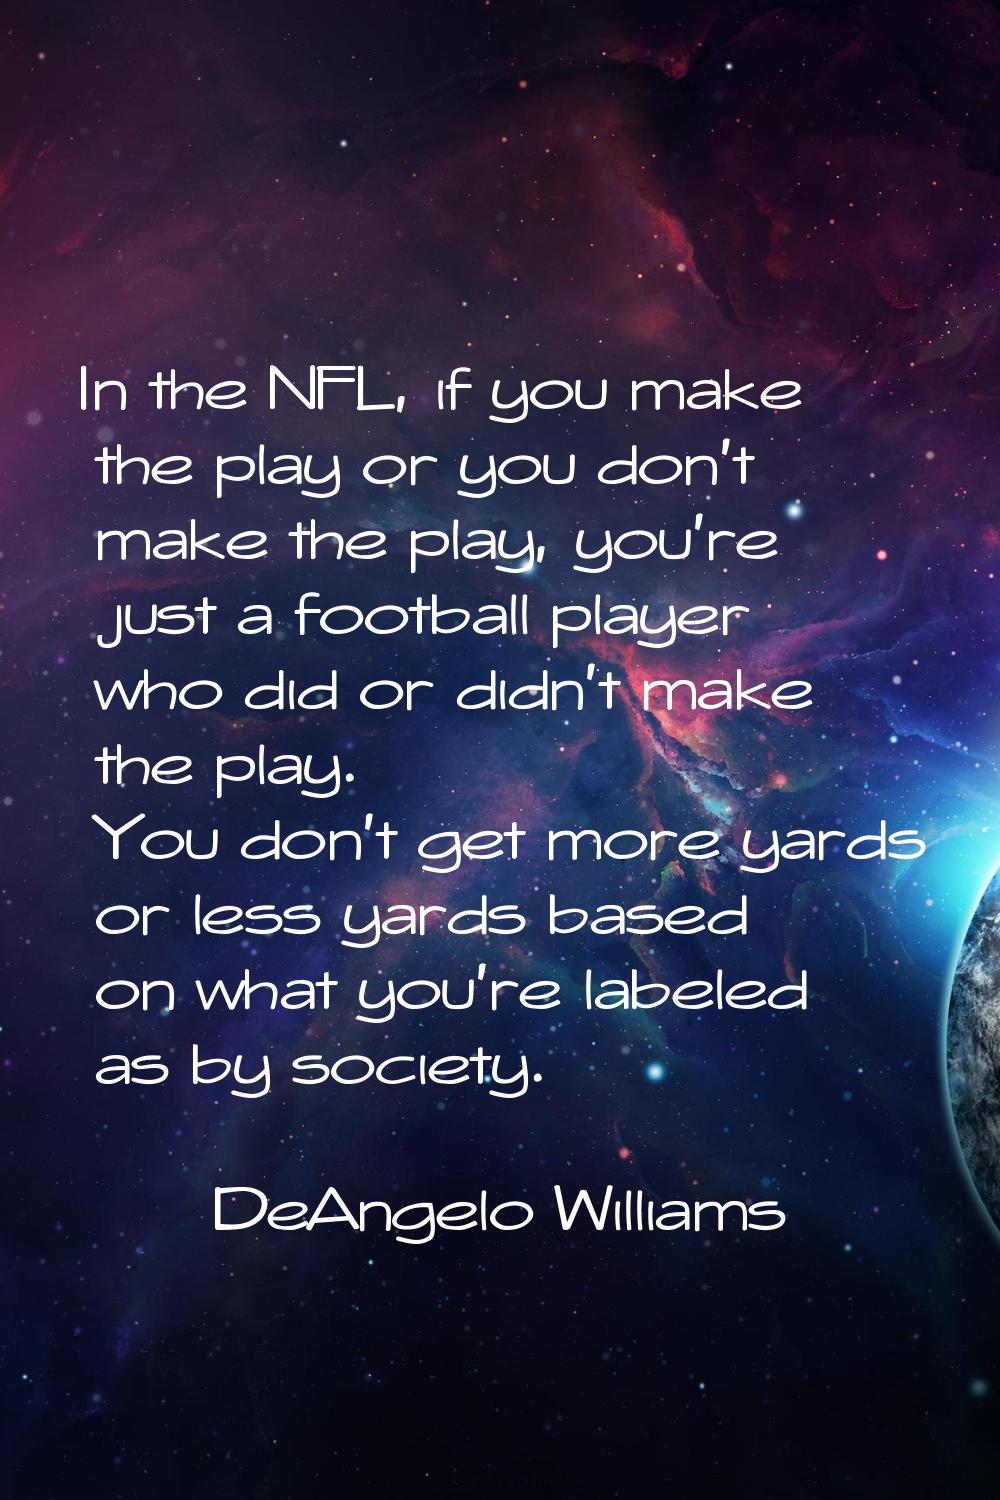 In the NFL, if you make the play or you don't make the play, you're just a football player who did 